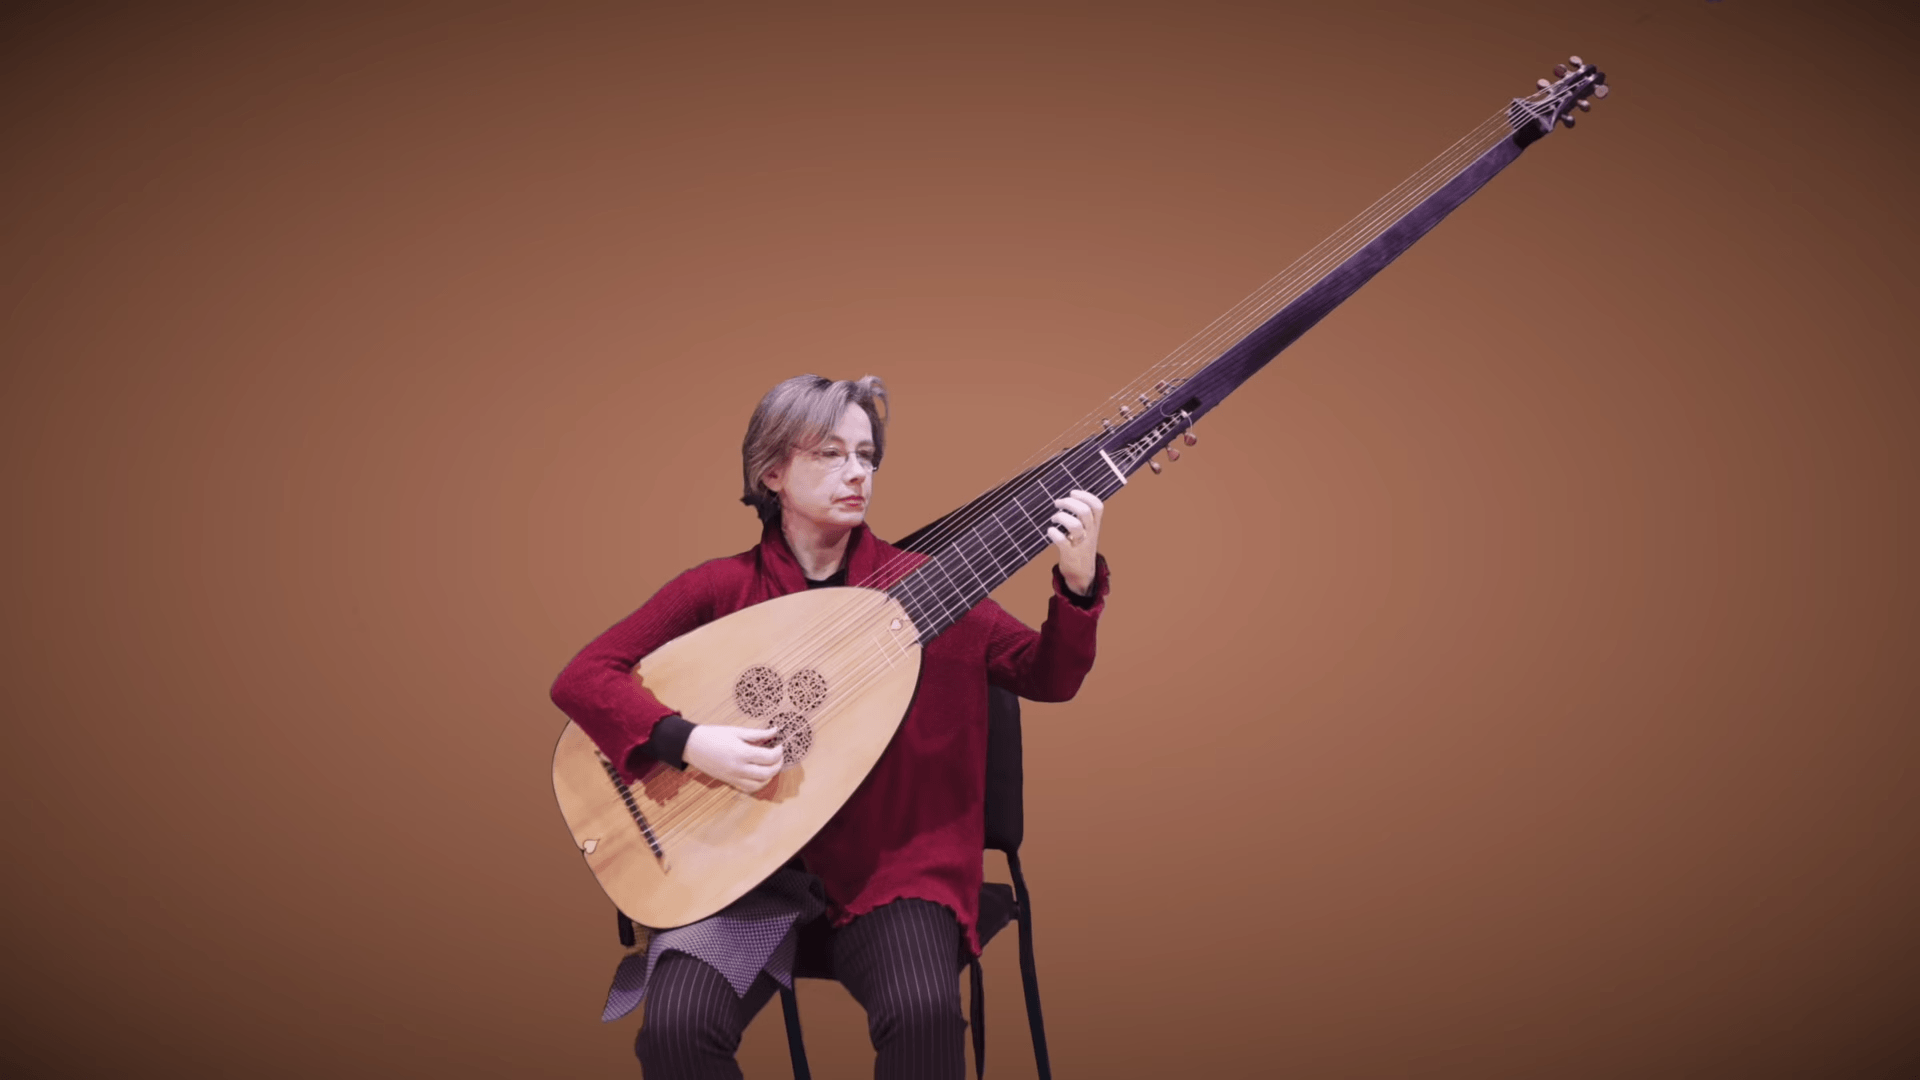 A Short History of the Long Necked Theorbo Lute